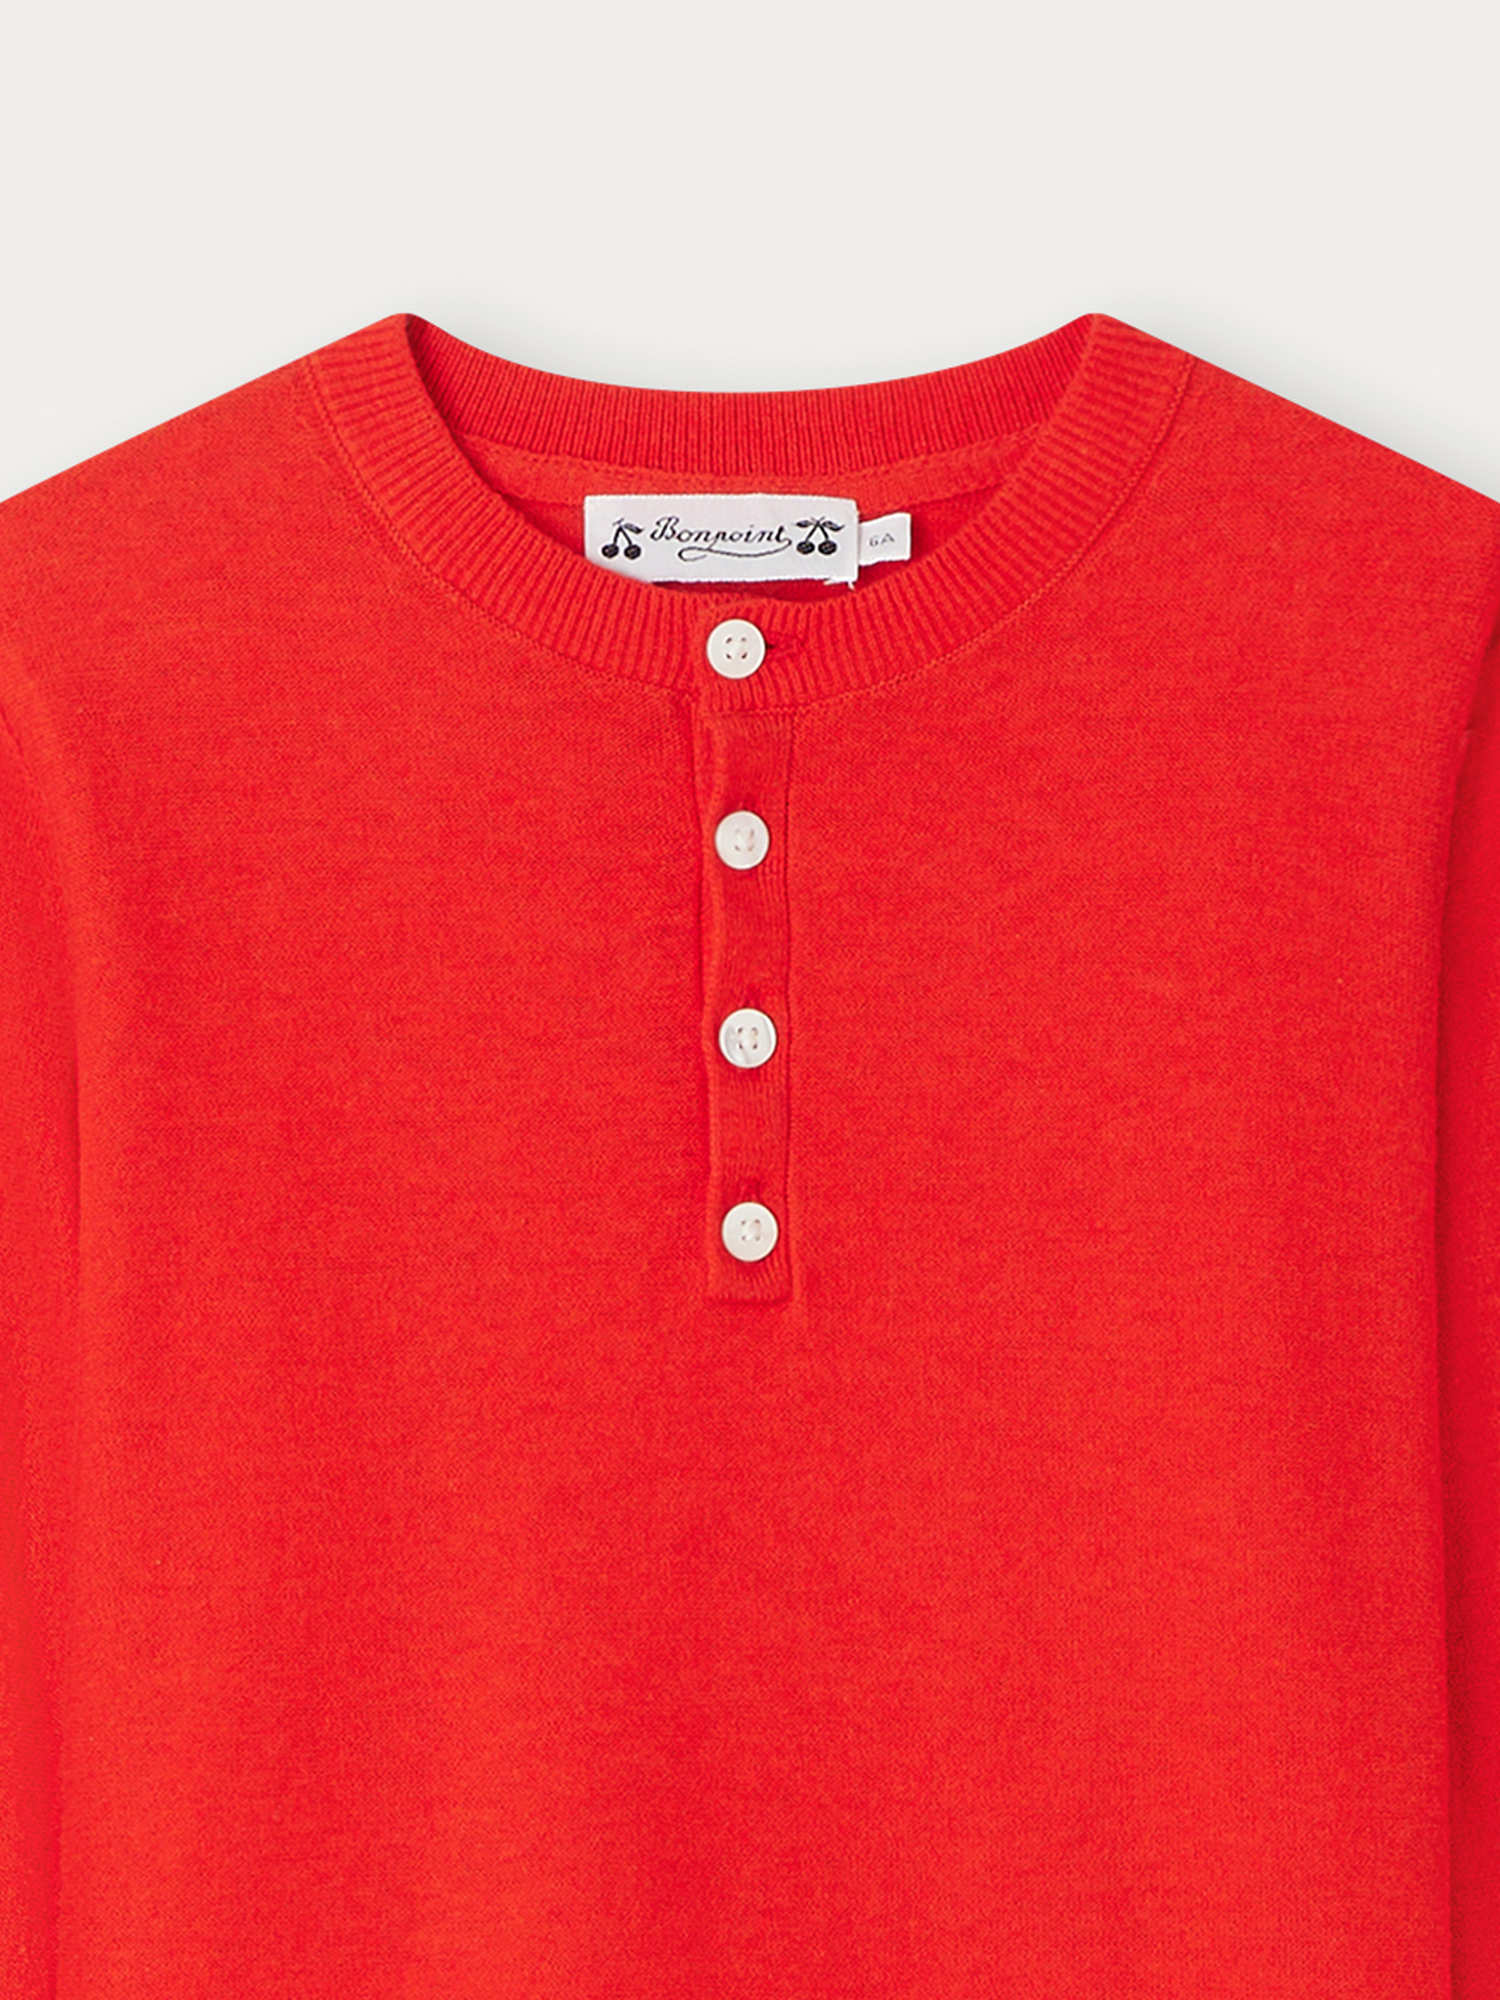 Boys Red Cotton Sweater